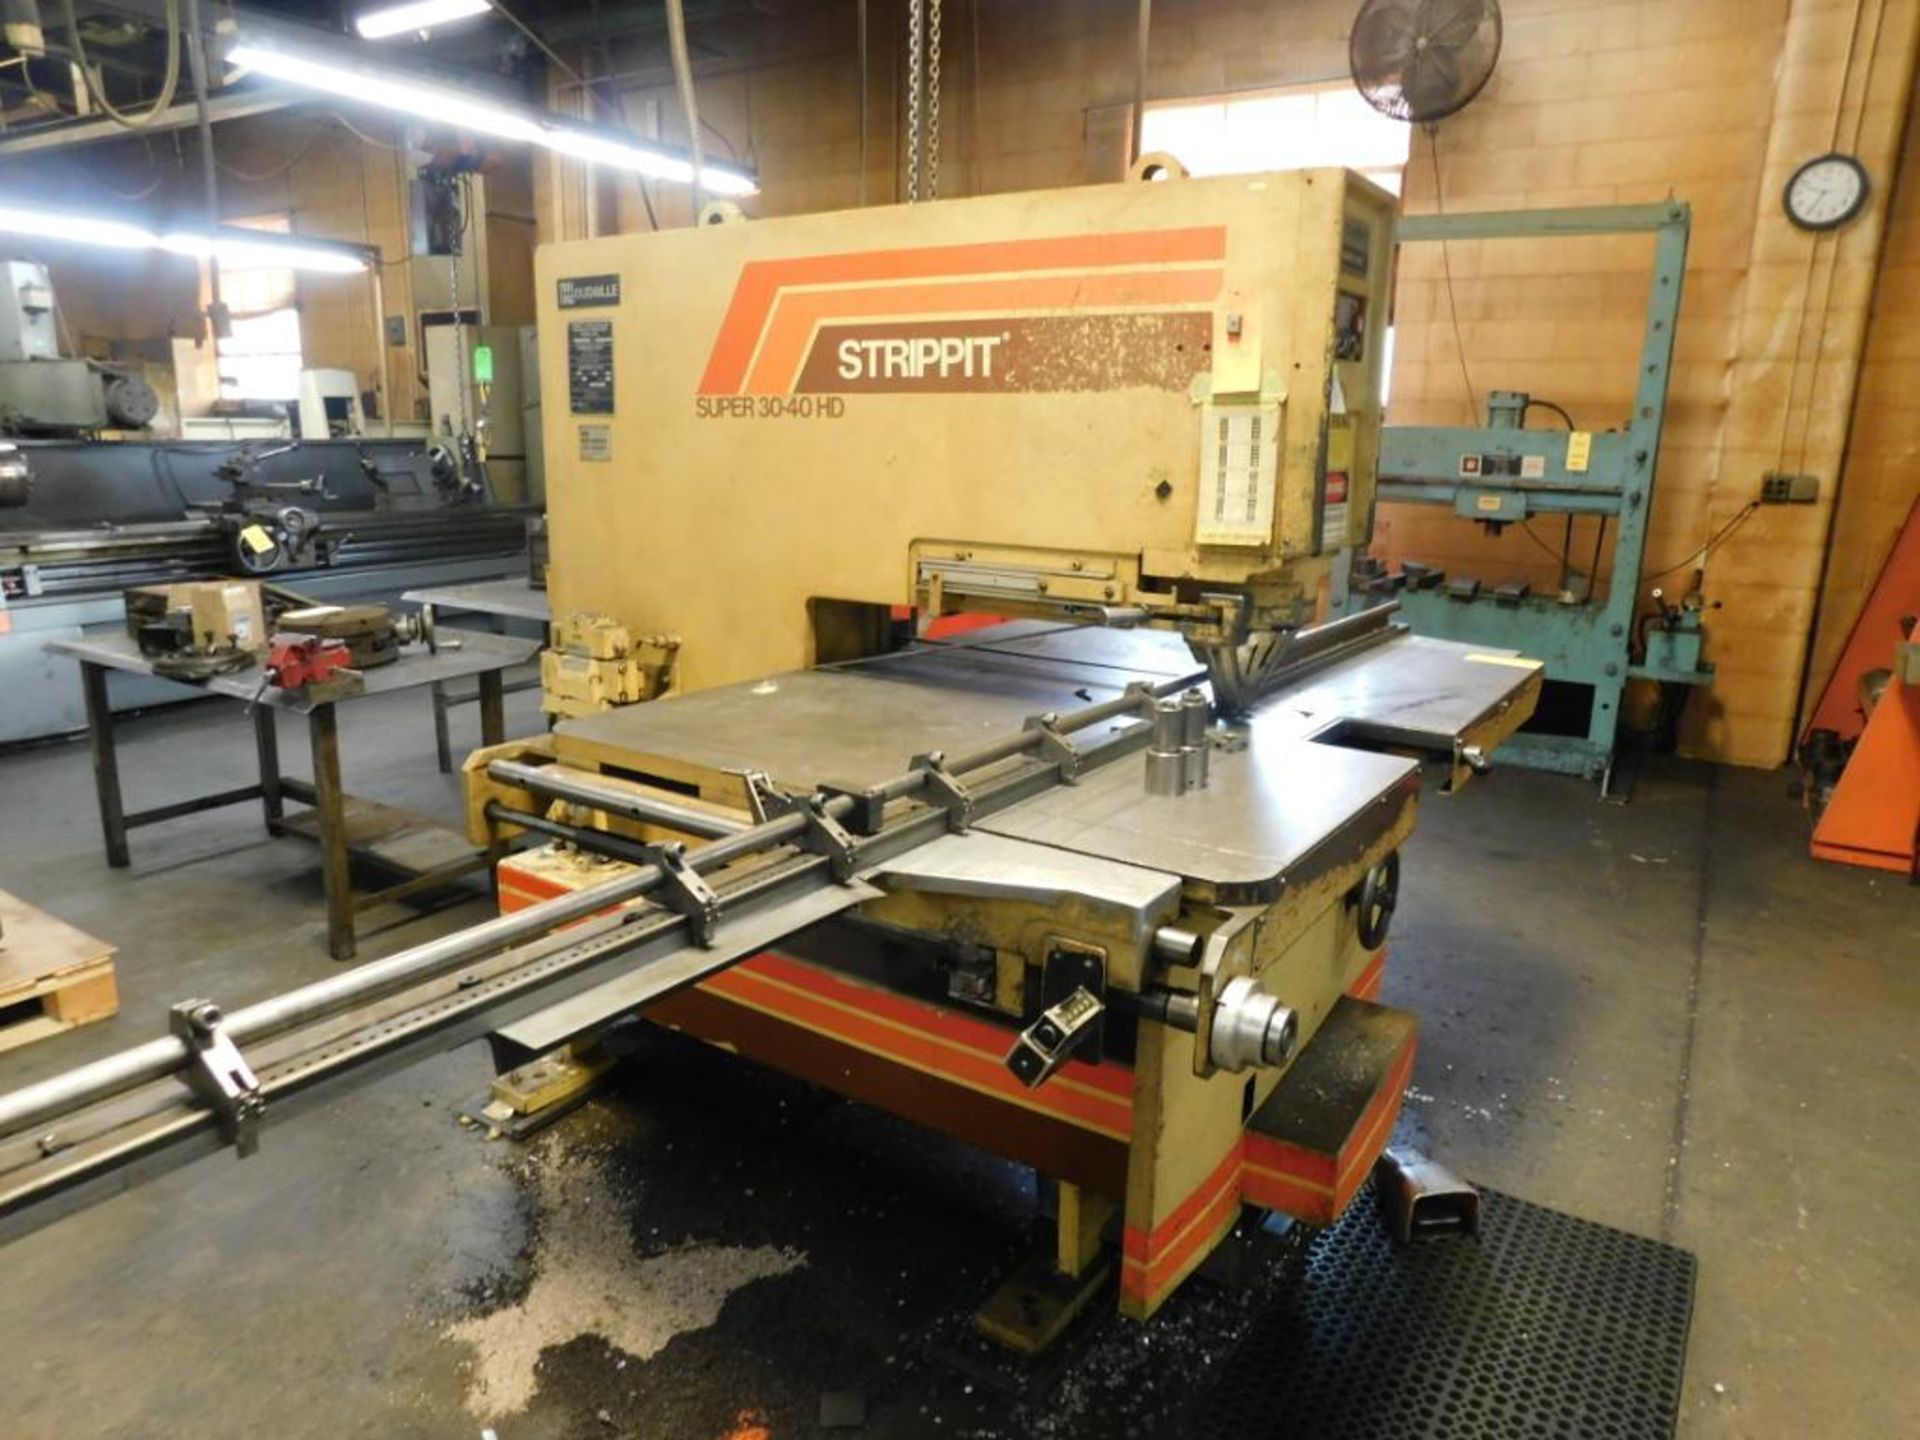 Strippit 40 Ton Single-Station Hydraulic Fabricating Punch Model Super 30-40-HD, S/N 23871684, 36 - Image 2 of 3